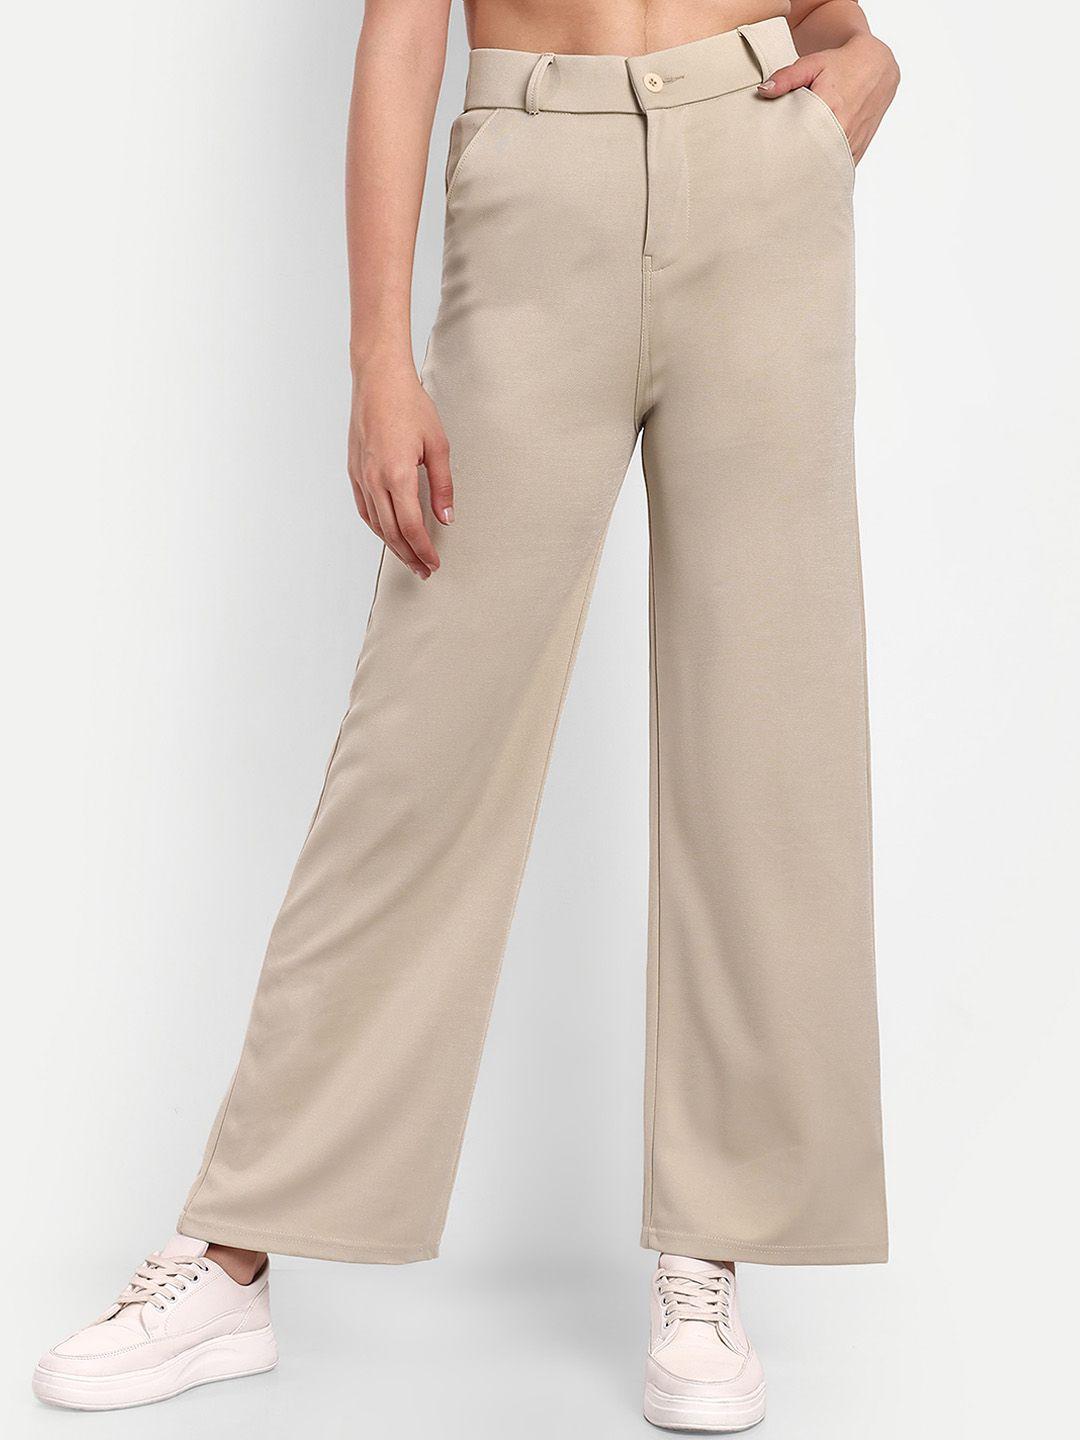 next-one-women-smart-easy-wash-loose-fit-high-rise-parallel-trousers